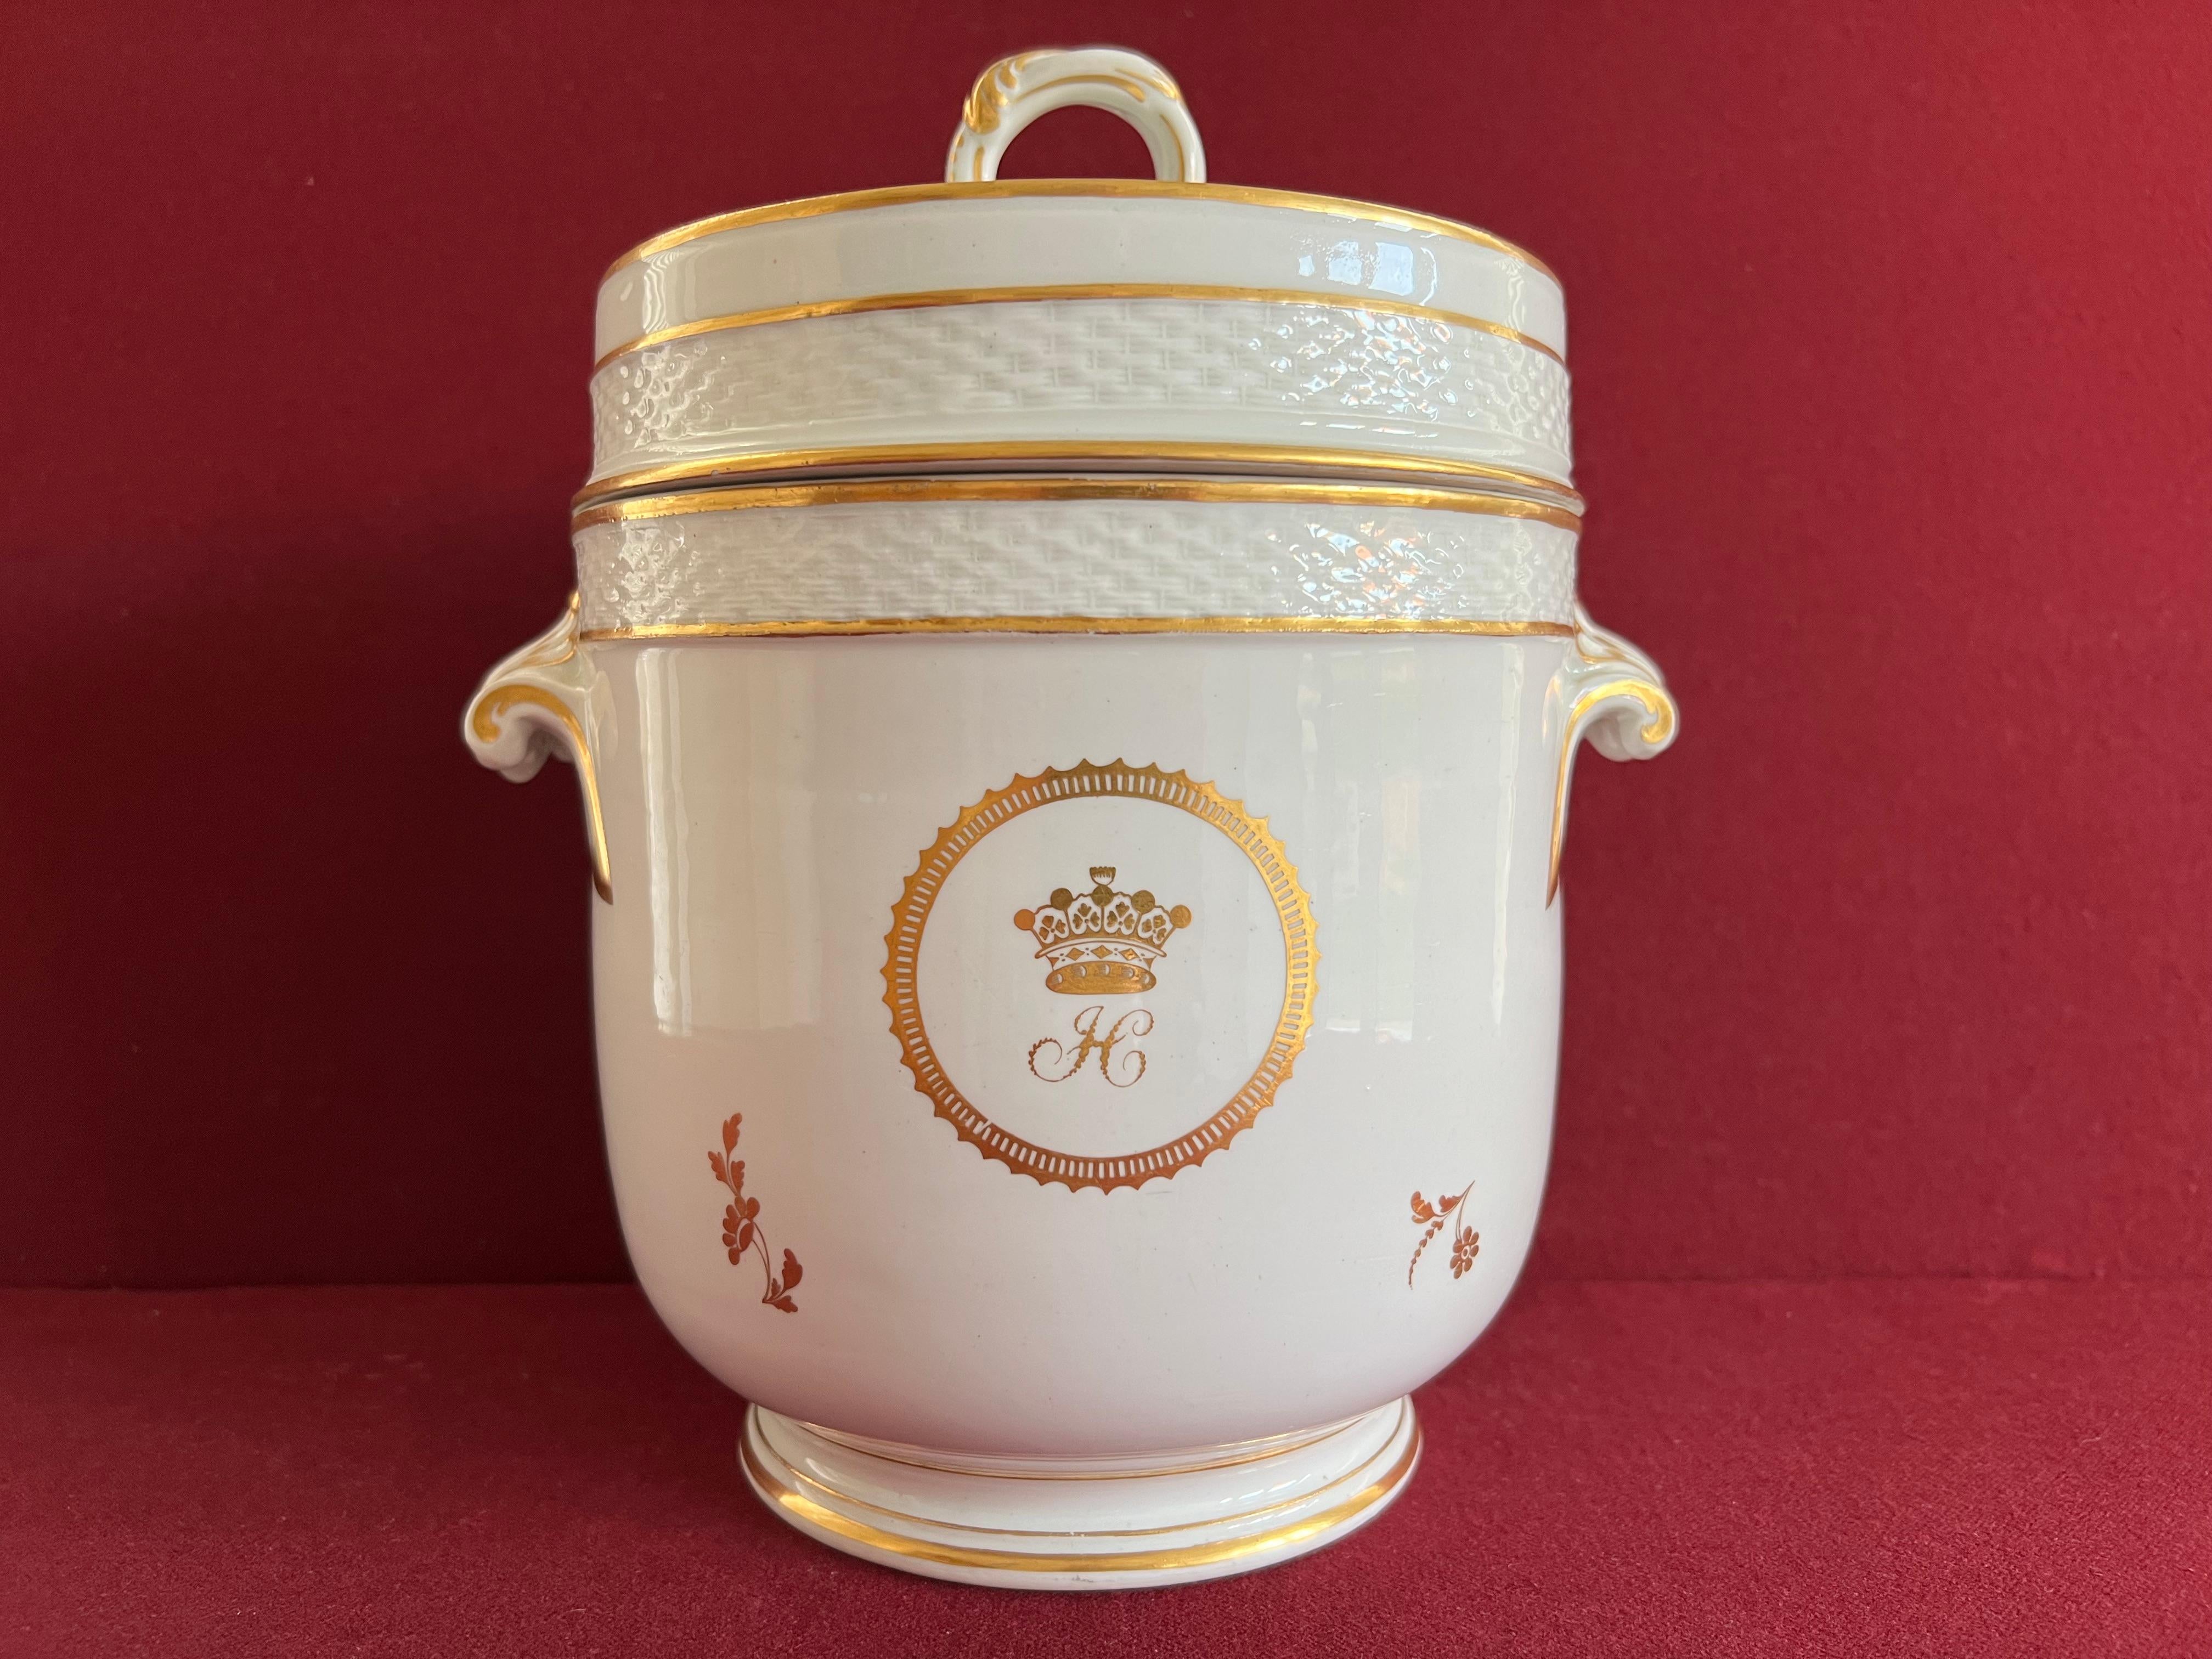 A wonderful 18th century Derby Porcelain Ice Pail & Cover c.1790. White porcelain decorated with a coronet of a Marquess and the letter ‘H’ on either side and scattered flowers in gold. Puce factory mark for the Duesbury period.

Condition: